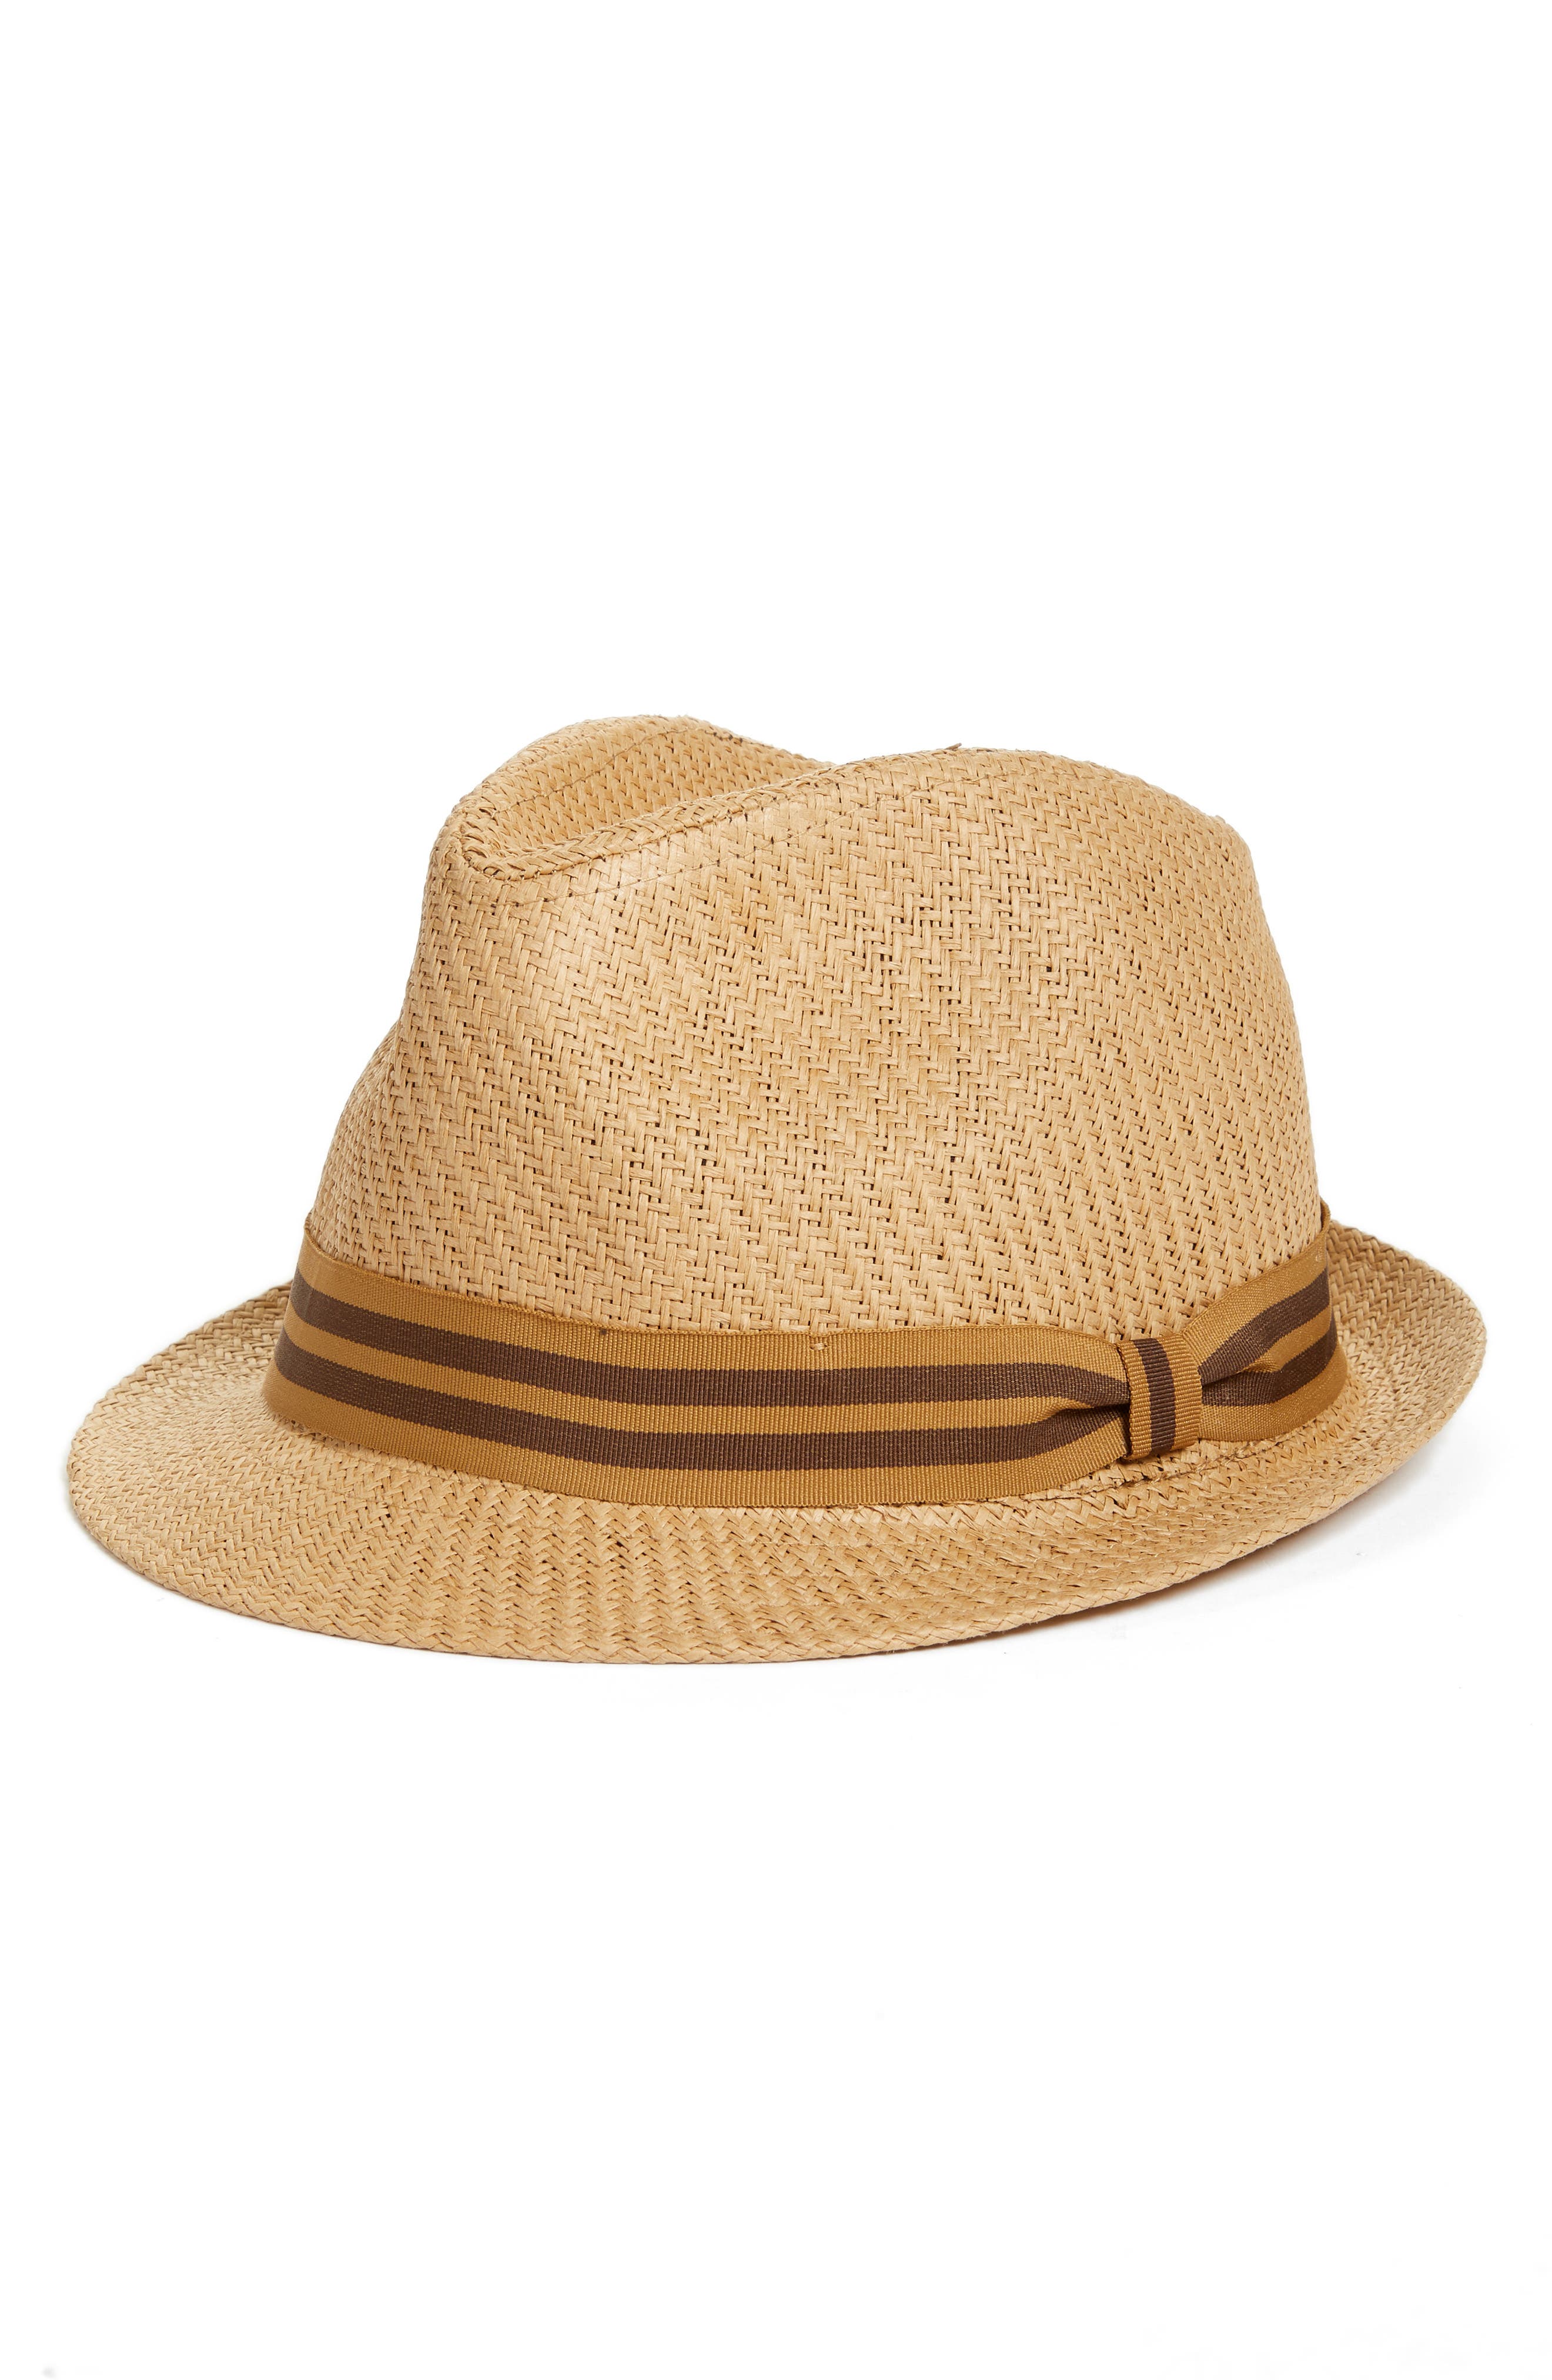 1960s – 70s Style Men’s Hats GOORIN BROS. Killian Jones Straw Trilby Size Largex-Large Us in Whiskey at Nordstrom Rack $14.97 AT vintagedancer.com